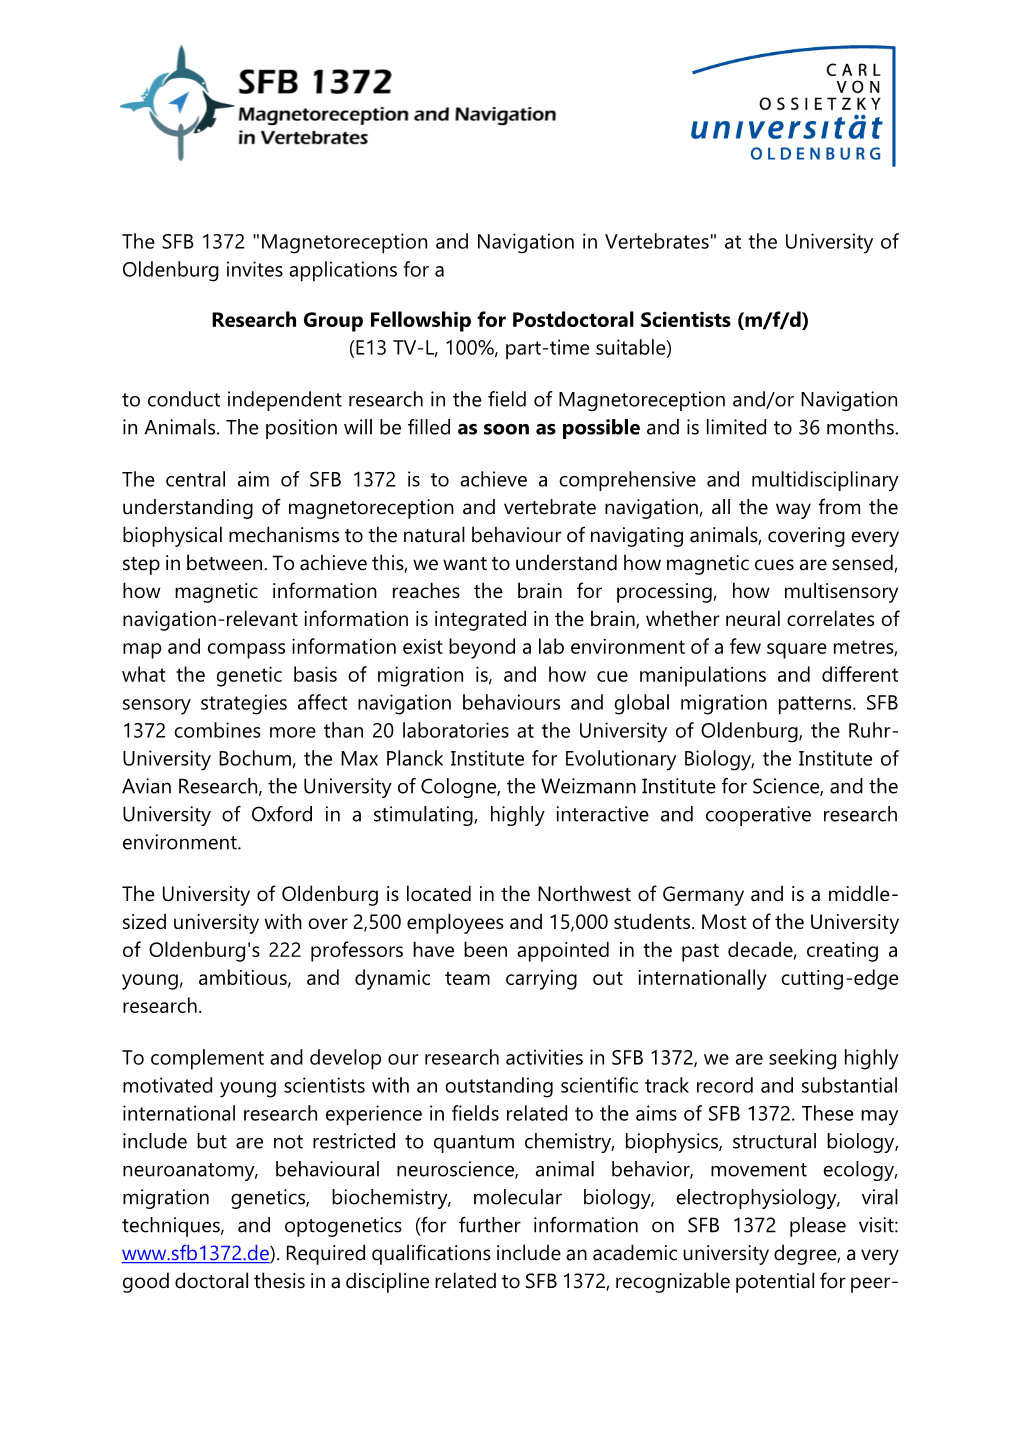 The SFB 1372 "Magnetoreception and Navigation in Vertebrates" at the University of Oldenburg Invites Applications for A